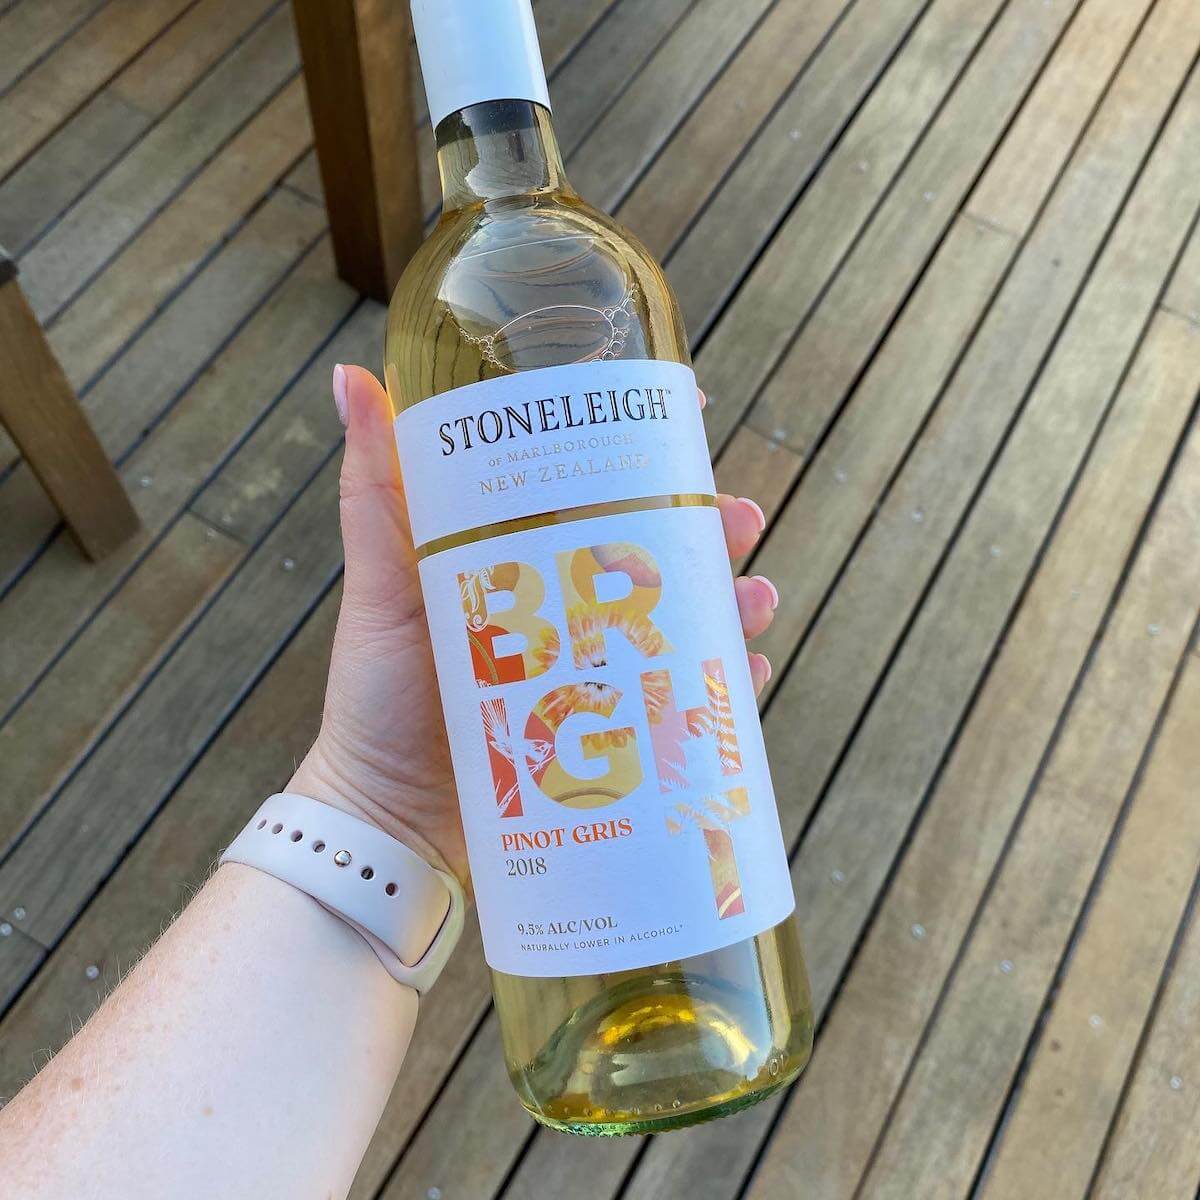 Stoneleigh Bright 2018 Pinot Gris - Lower in Alcohol Wine